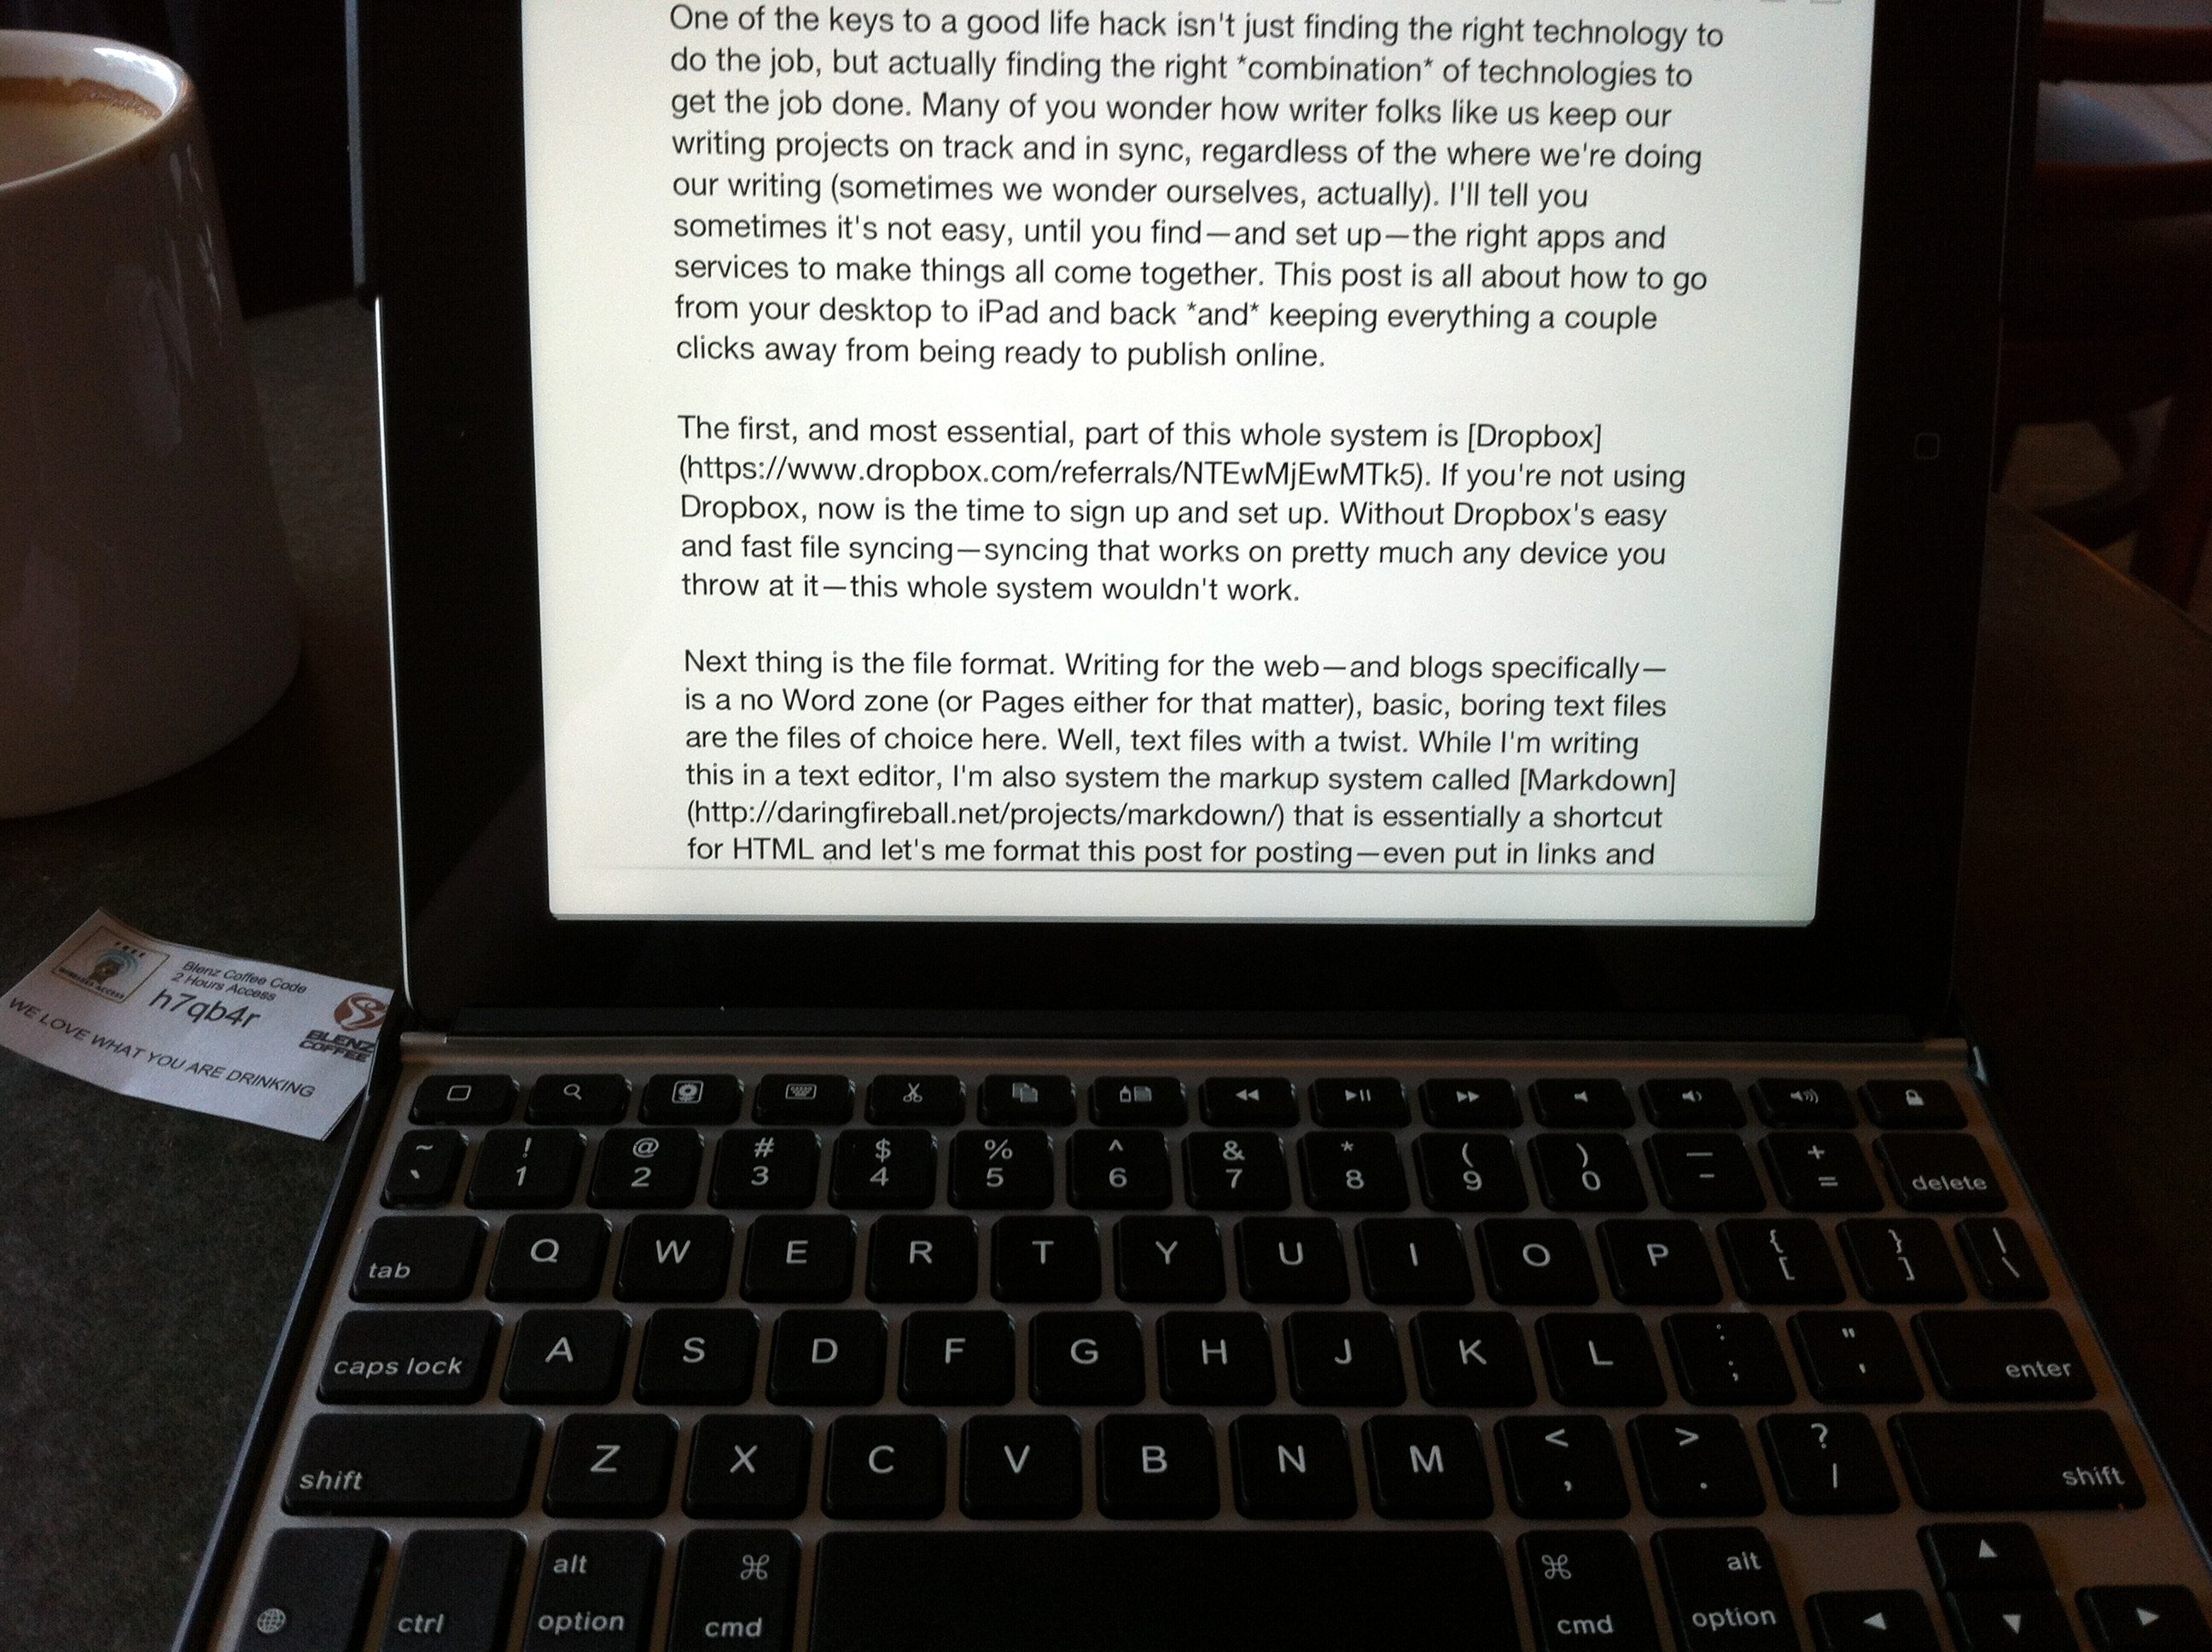 Desktop to iPad Blogging Workflow with Scrivener, Elements, Dropbox, and Marked